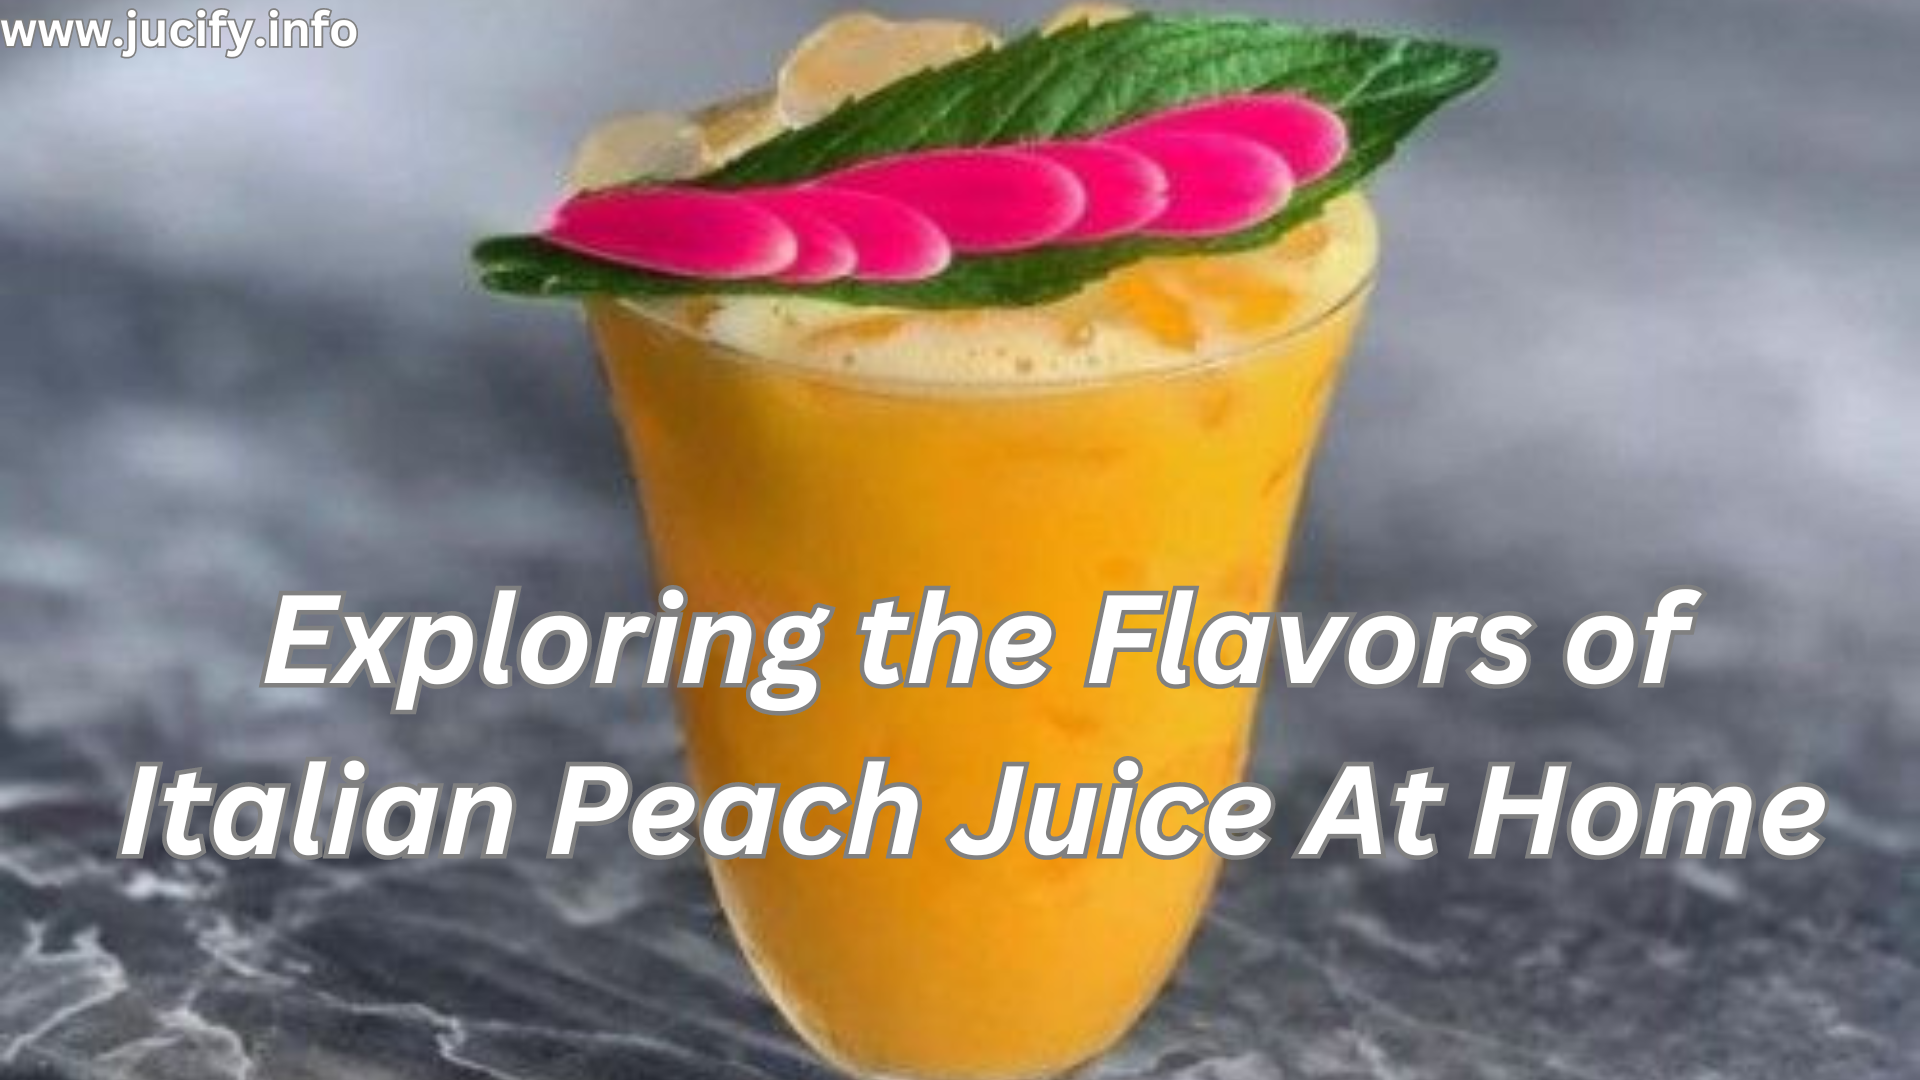 Exploring the Flavors of Italian Peach Juice At Home